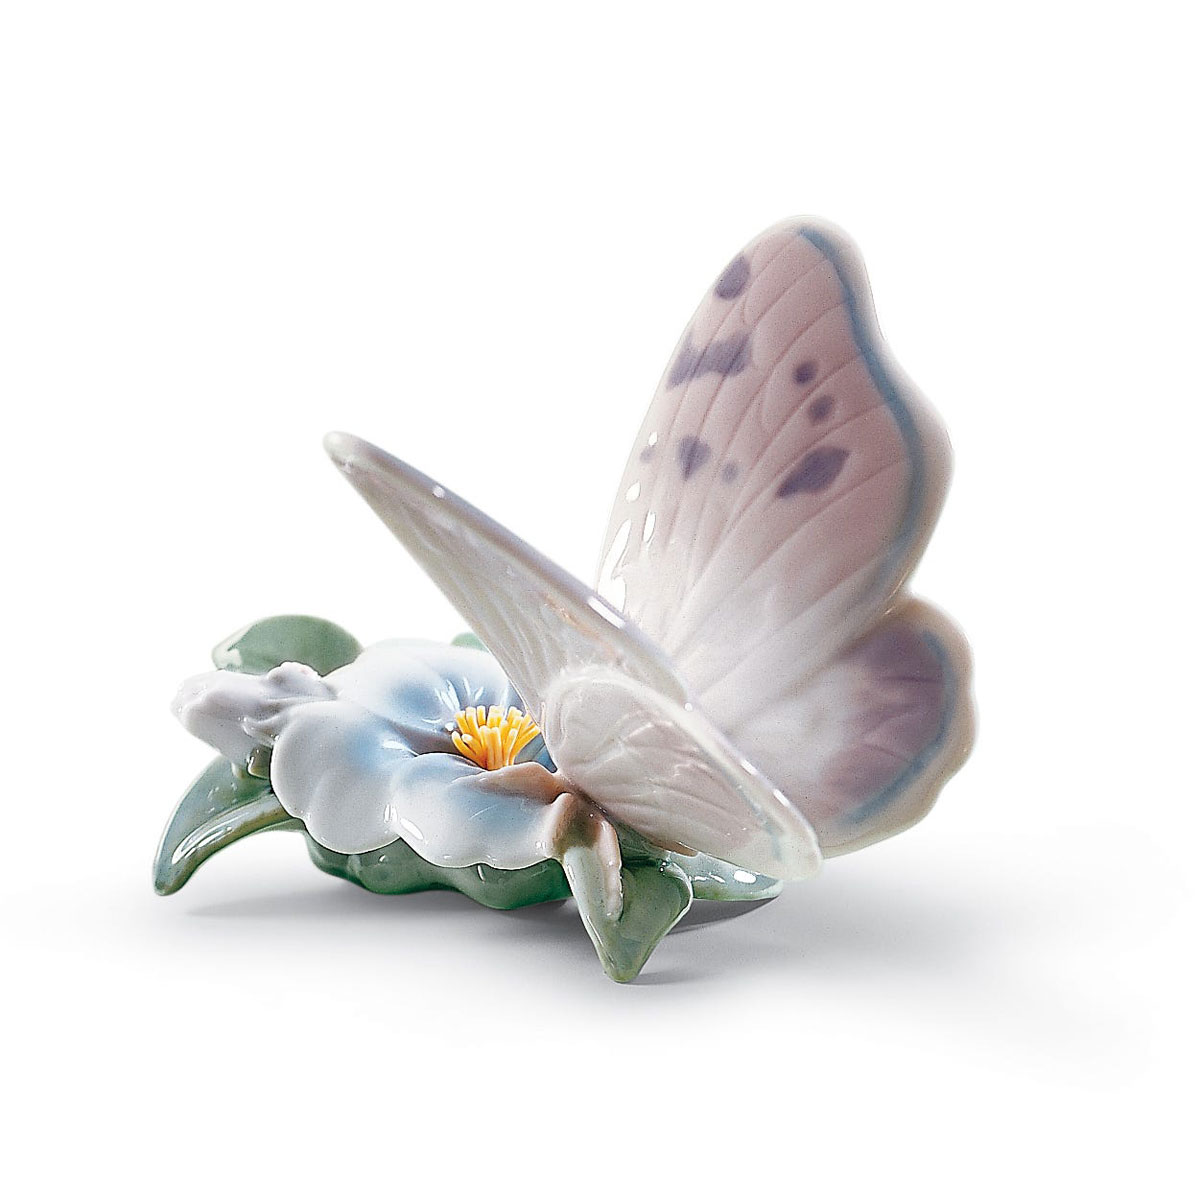 Lladro Classic Sculpture, Refreshing Pause Butterfly Figurine